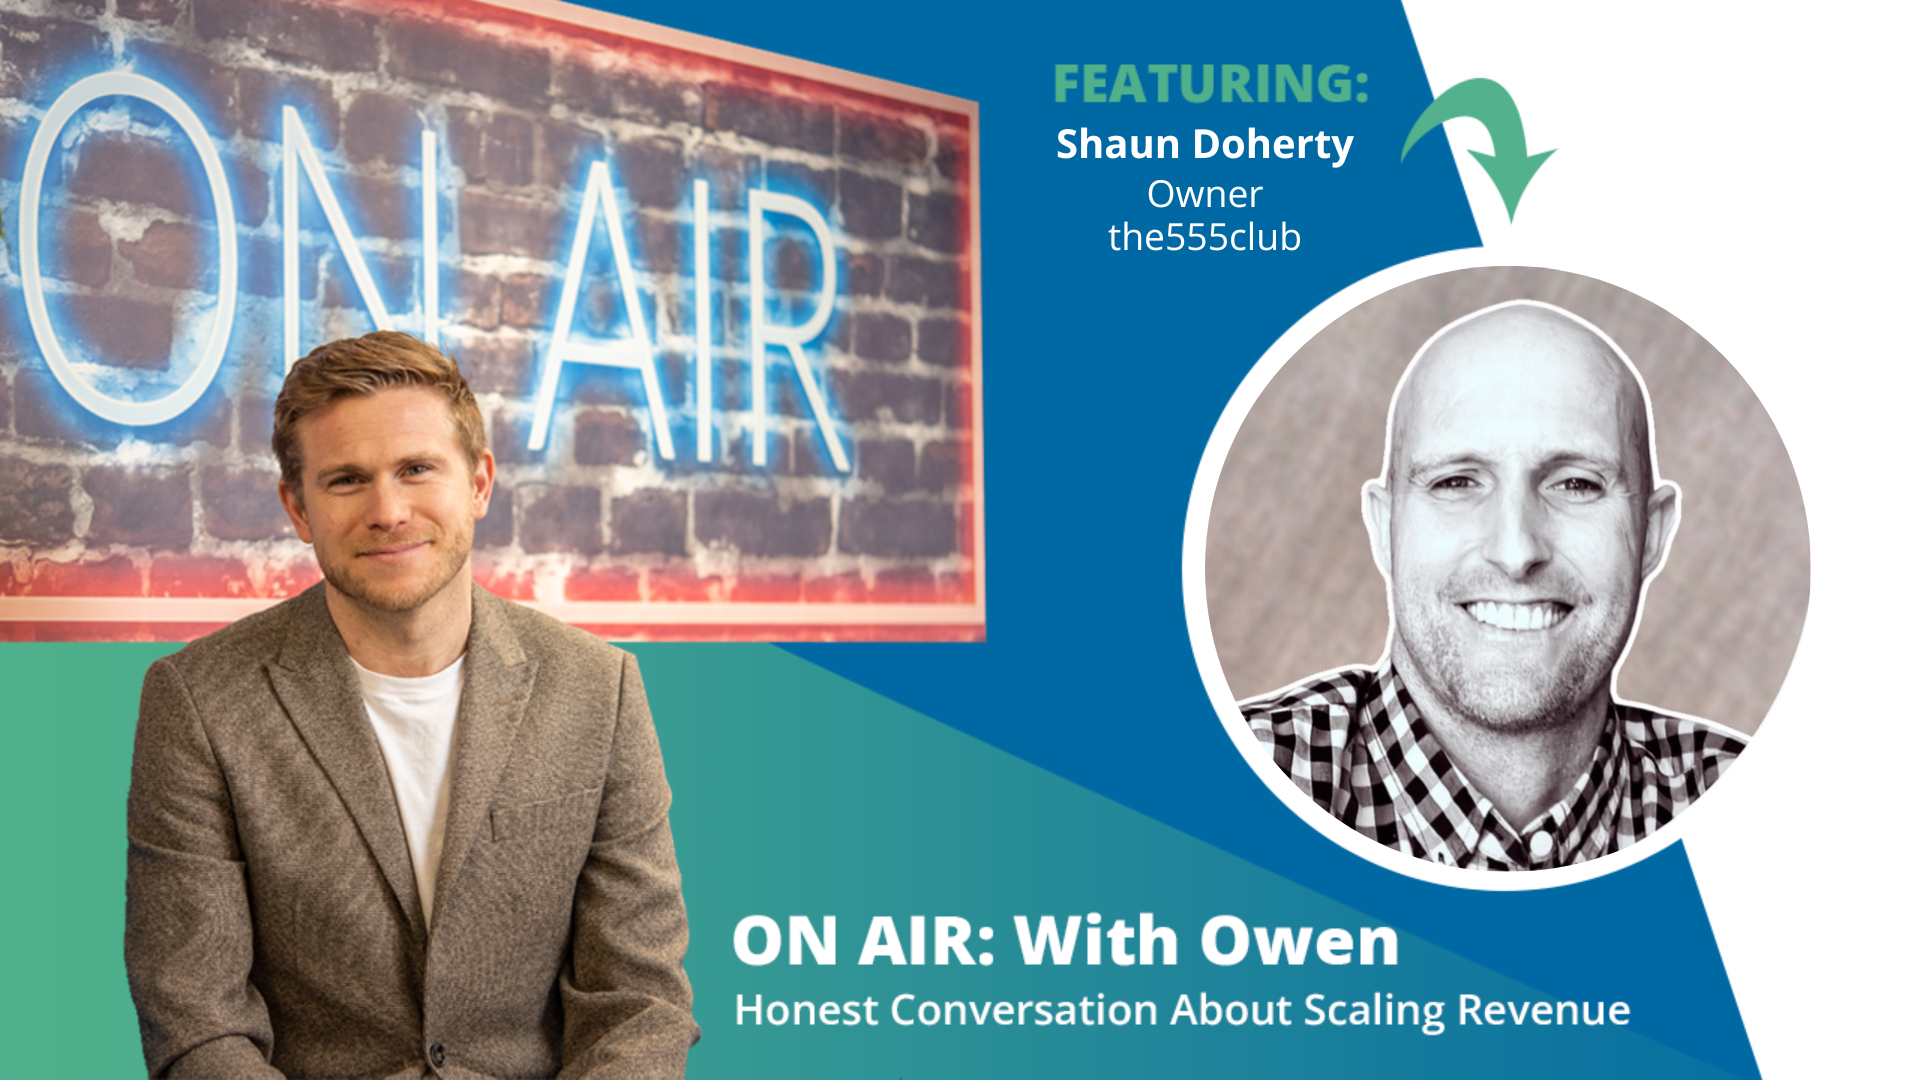 ON AIR: With Owen Episode 77 Featuring Shaun Doherty – Owner, the555club